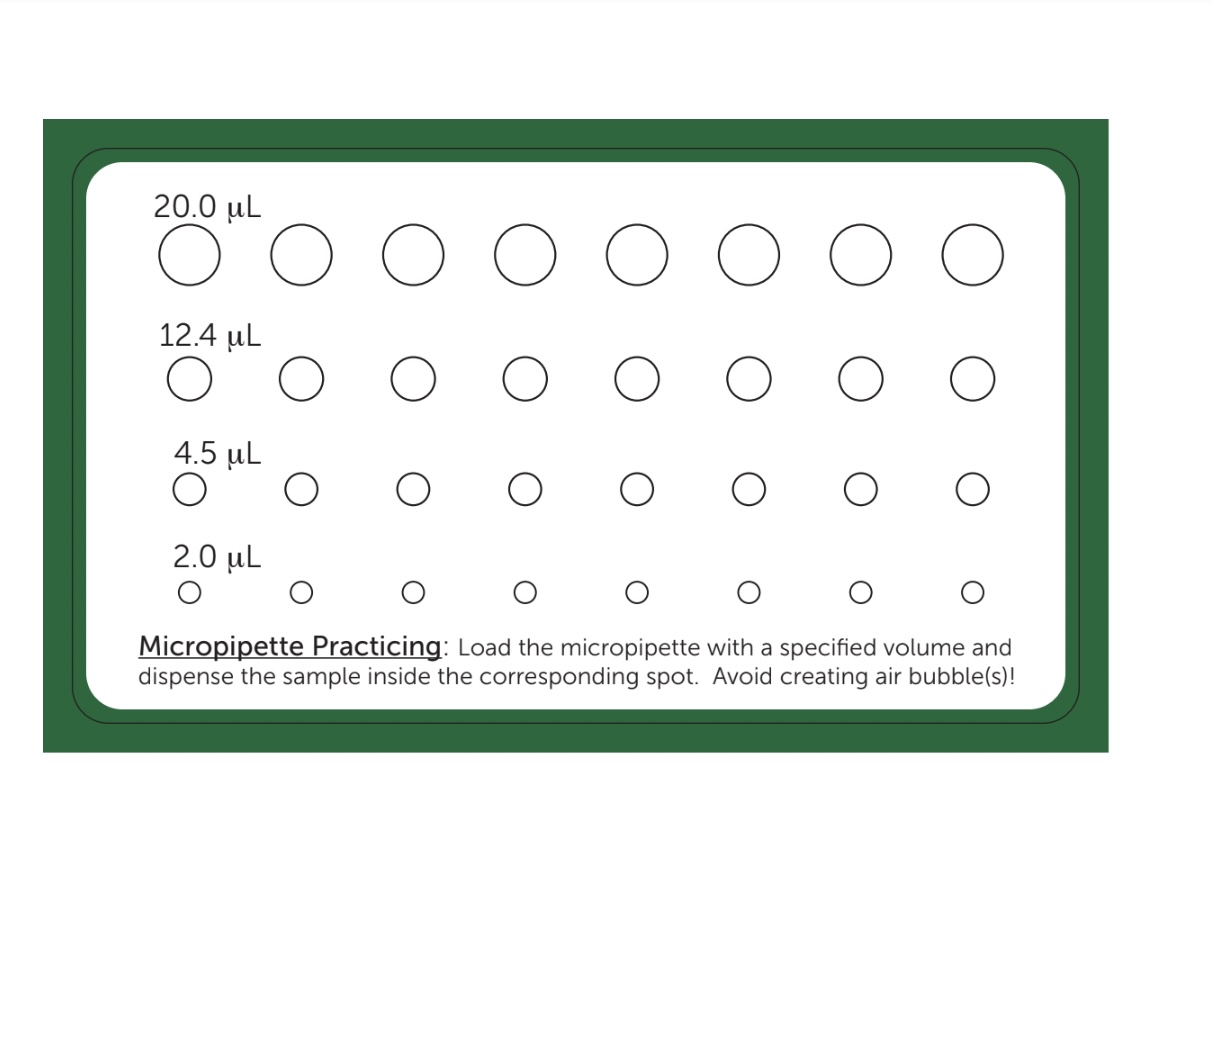 Laminated card for practicing pipetting various volumes